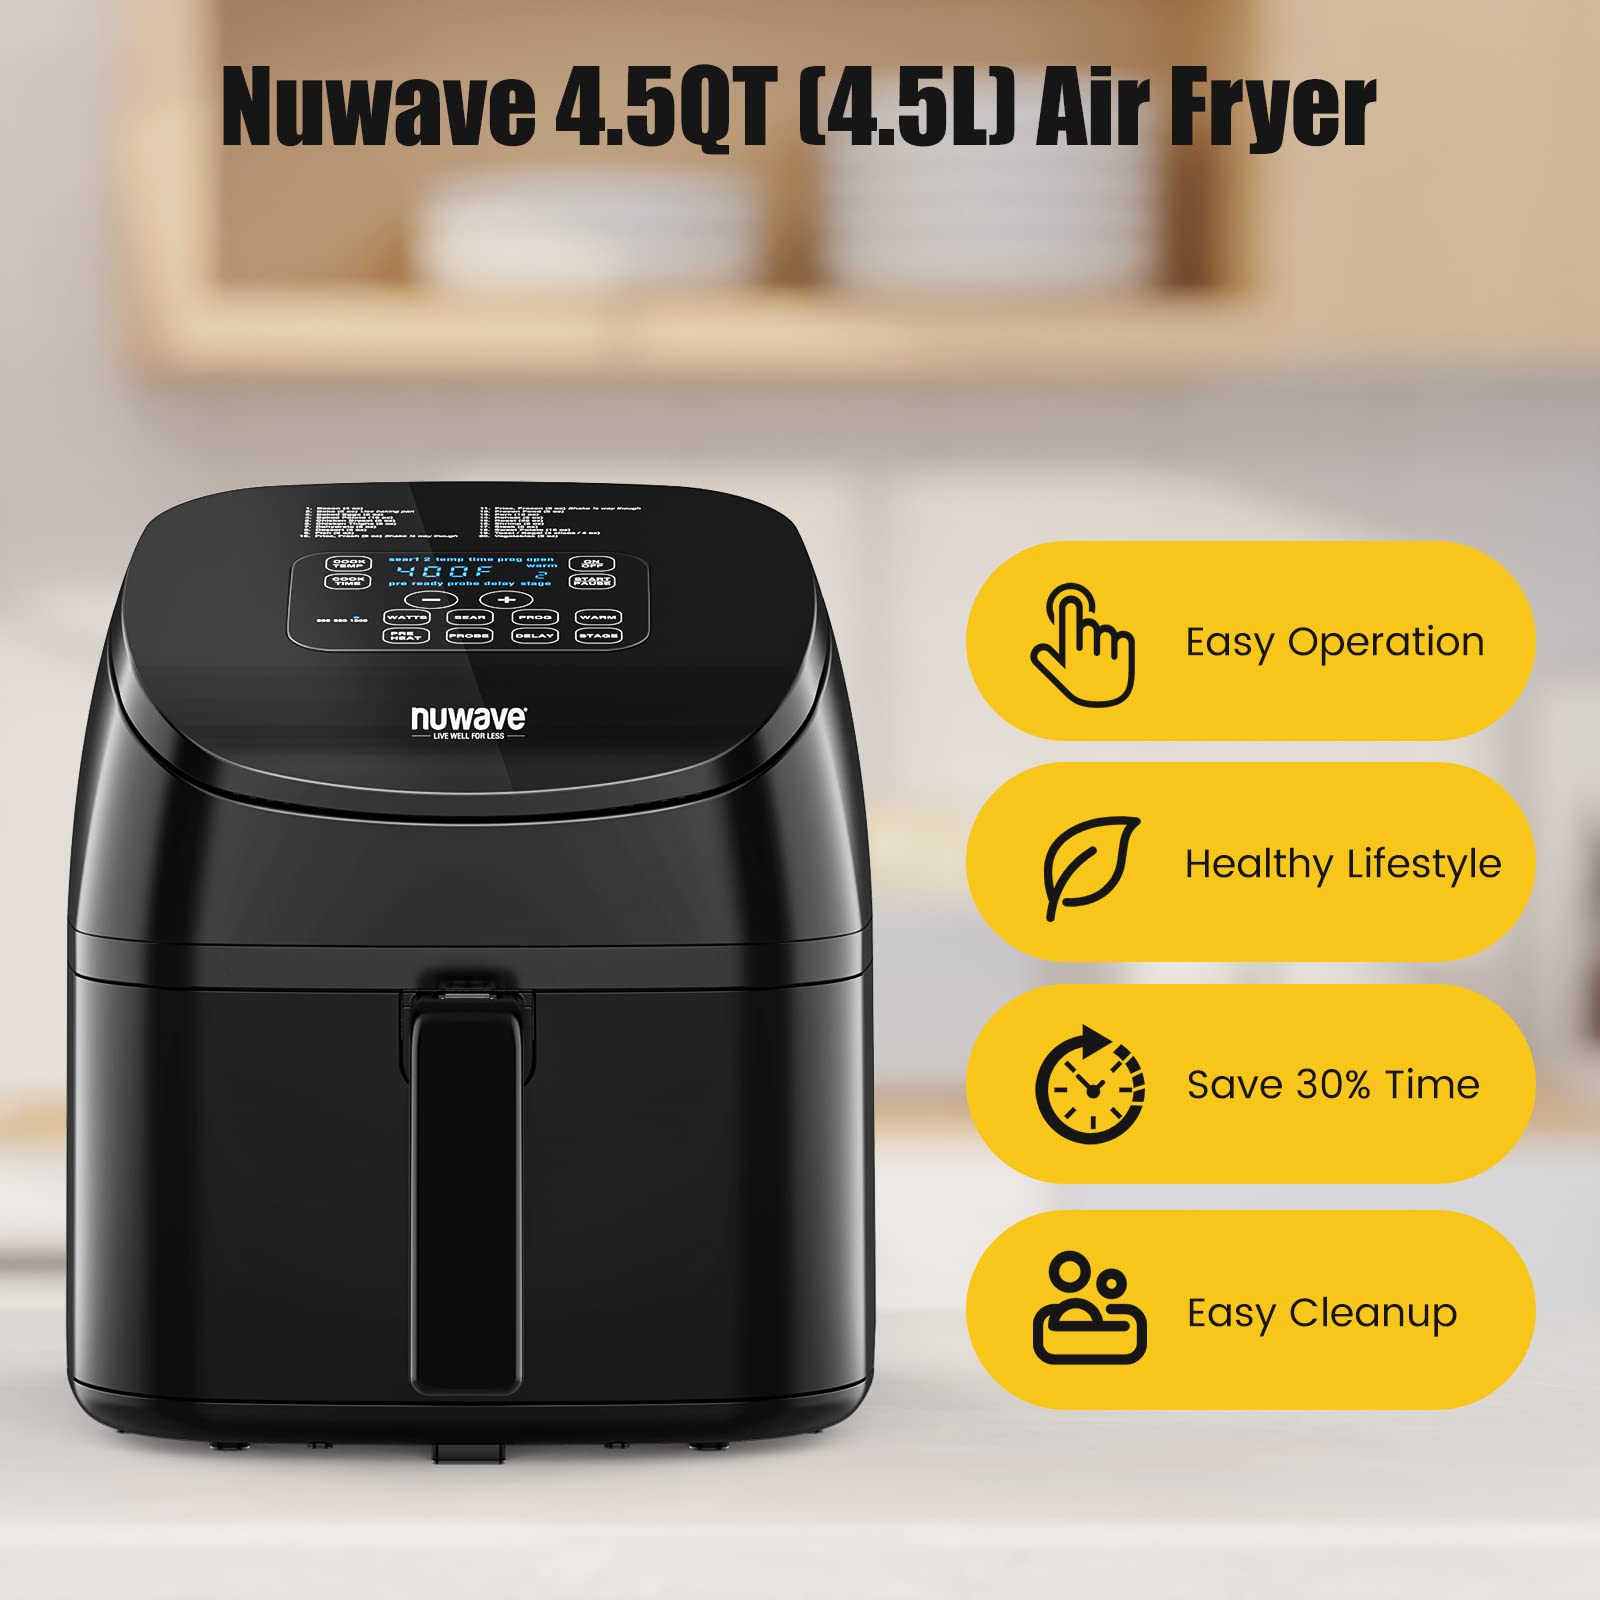 Nuwave Brio 4.5-Qt Air Fryer, 1 Touch Digital Controls, 100°-400°F Temp Controls in 5° Increments, Linear Thermal (Linear T) Technology, 3 Wattage Settings 600, 900 & 1500W, Built-In Safety Features